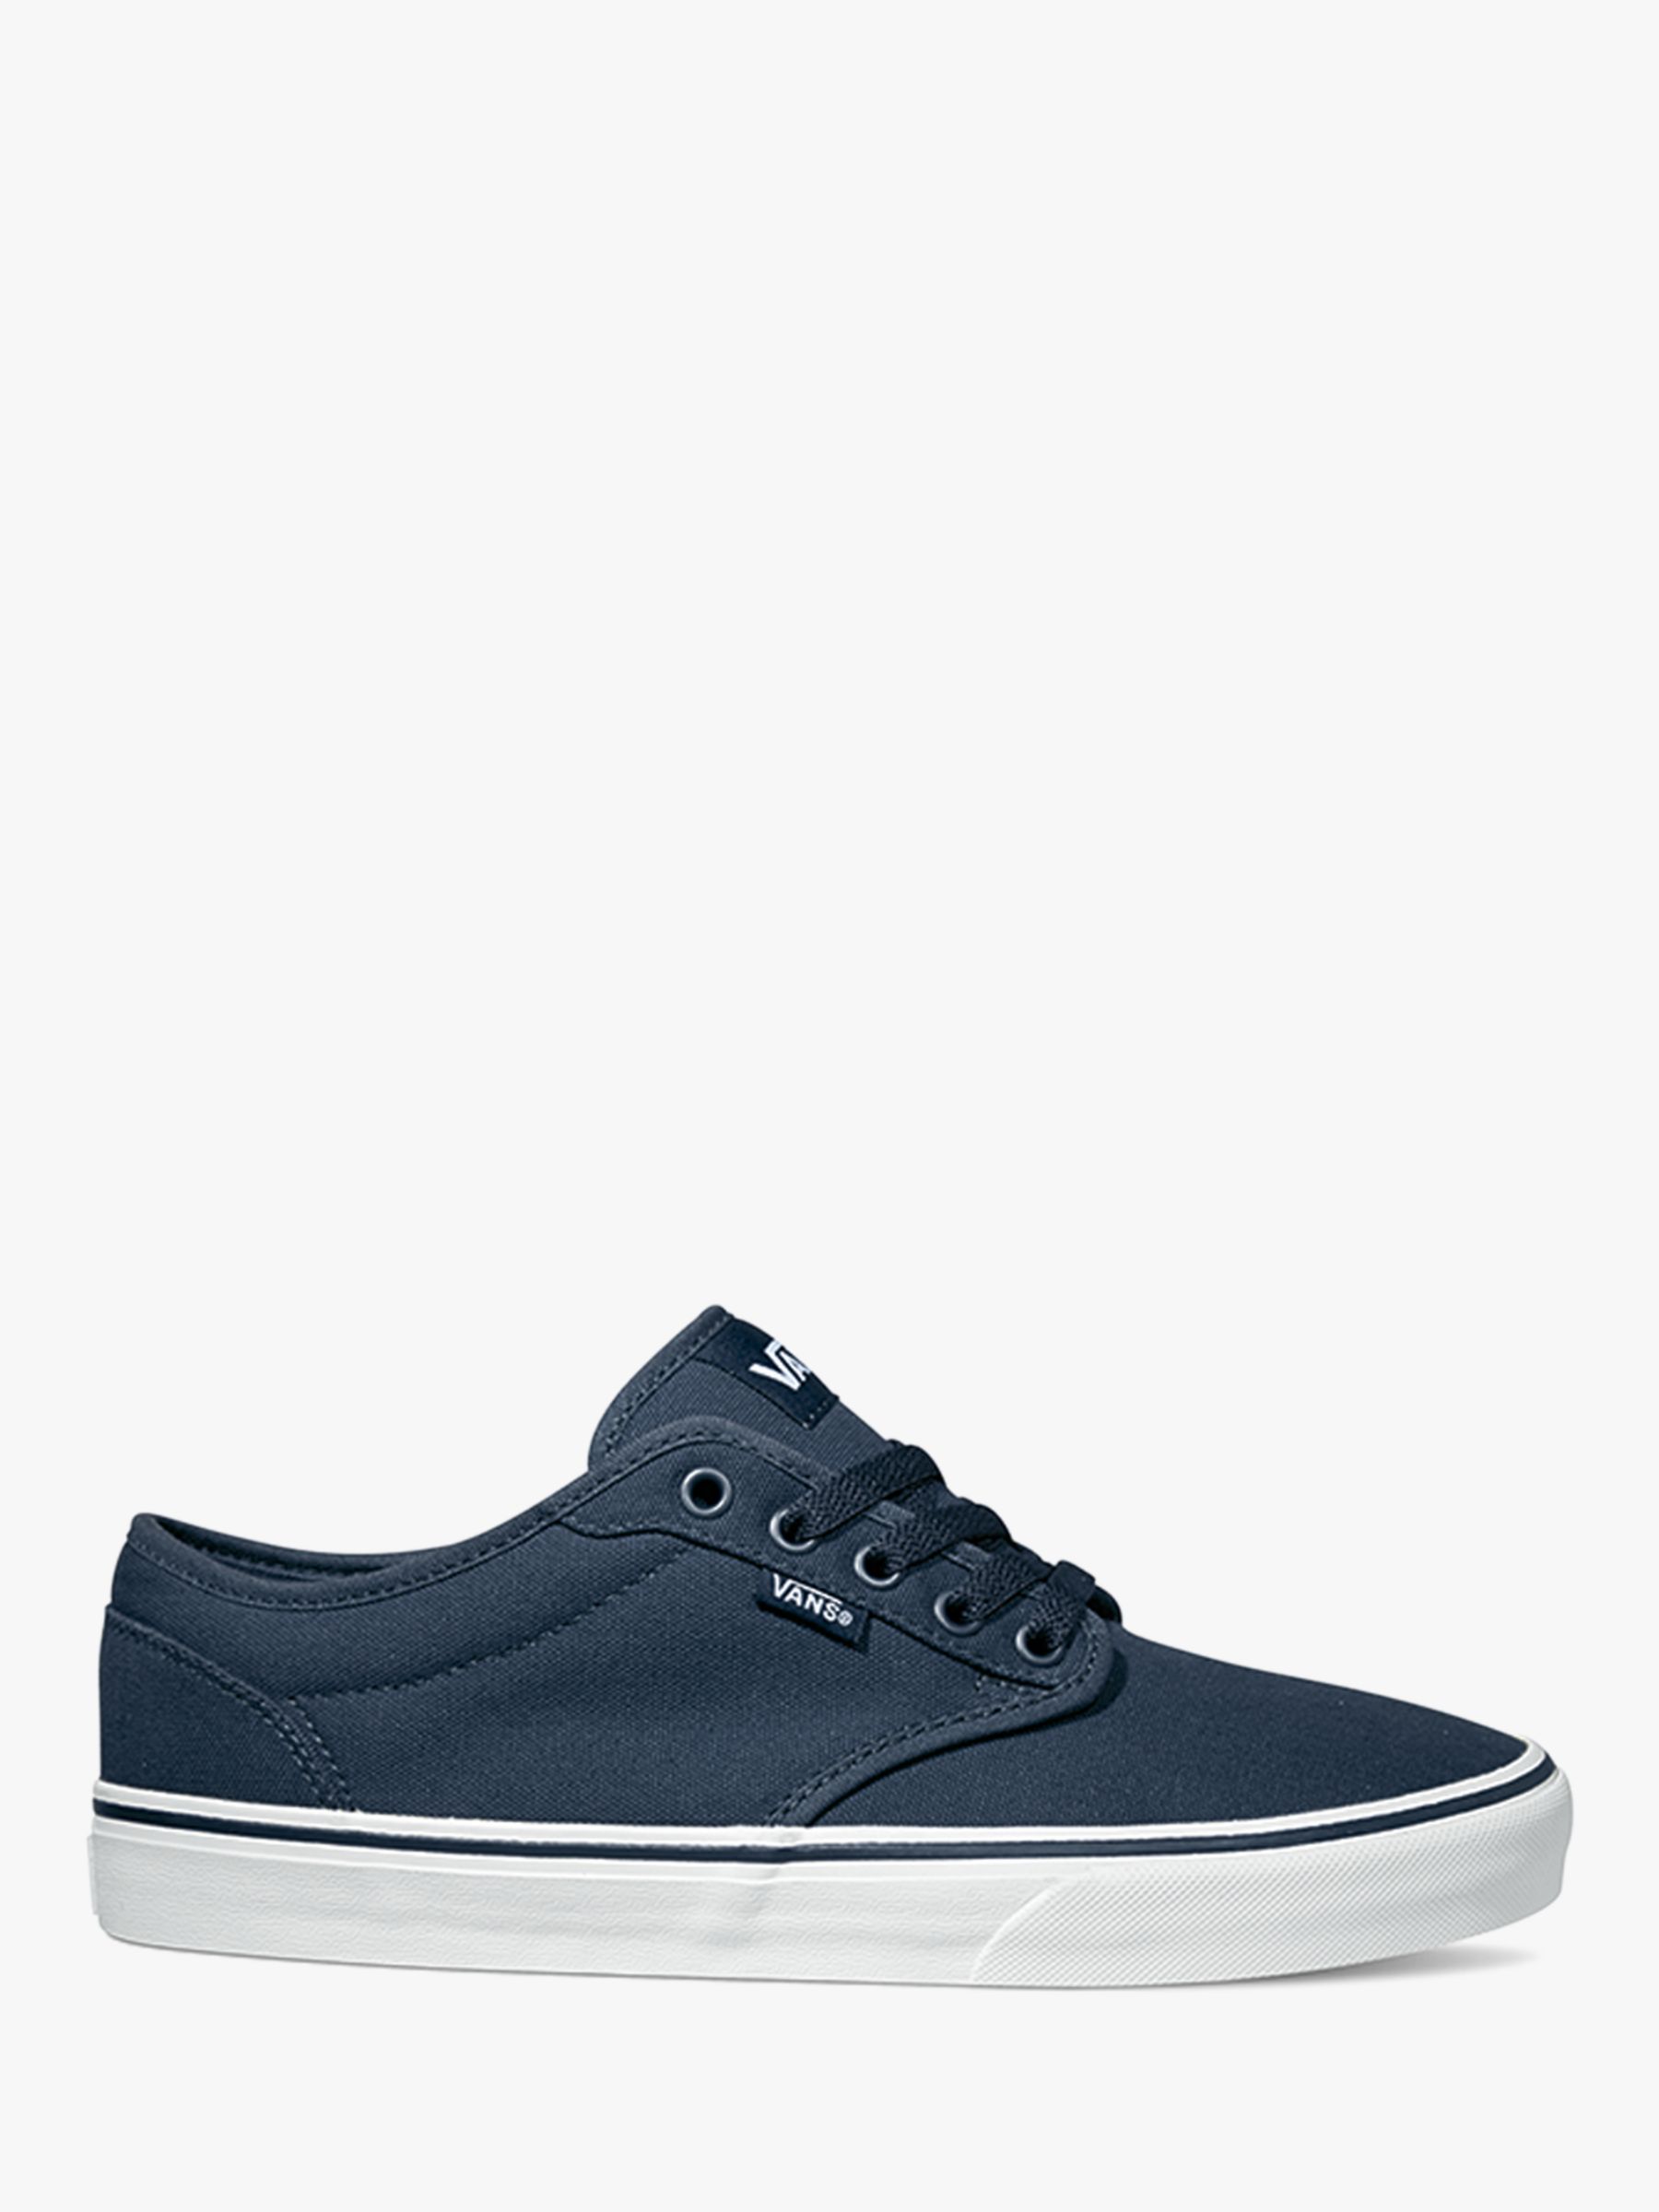 Vans Atwood Canvas Trainers, Navy/White 